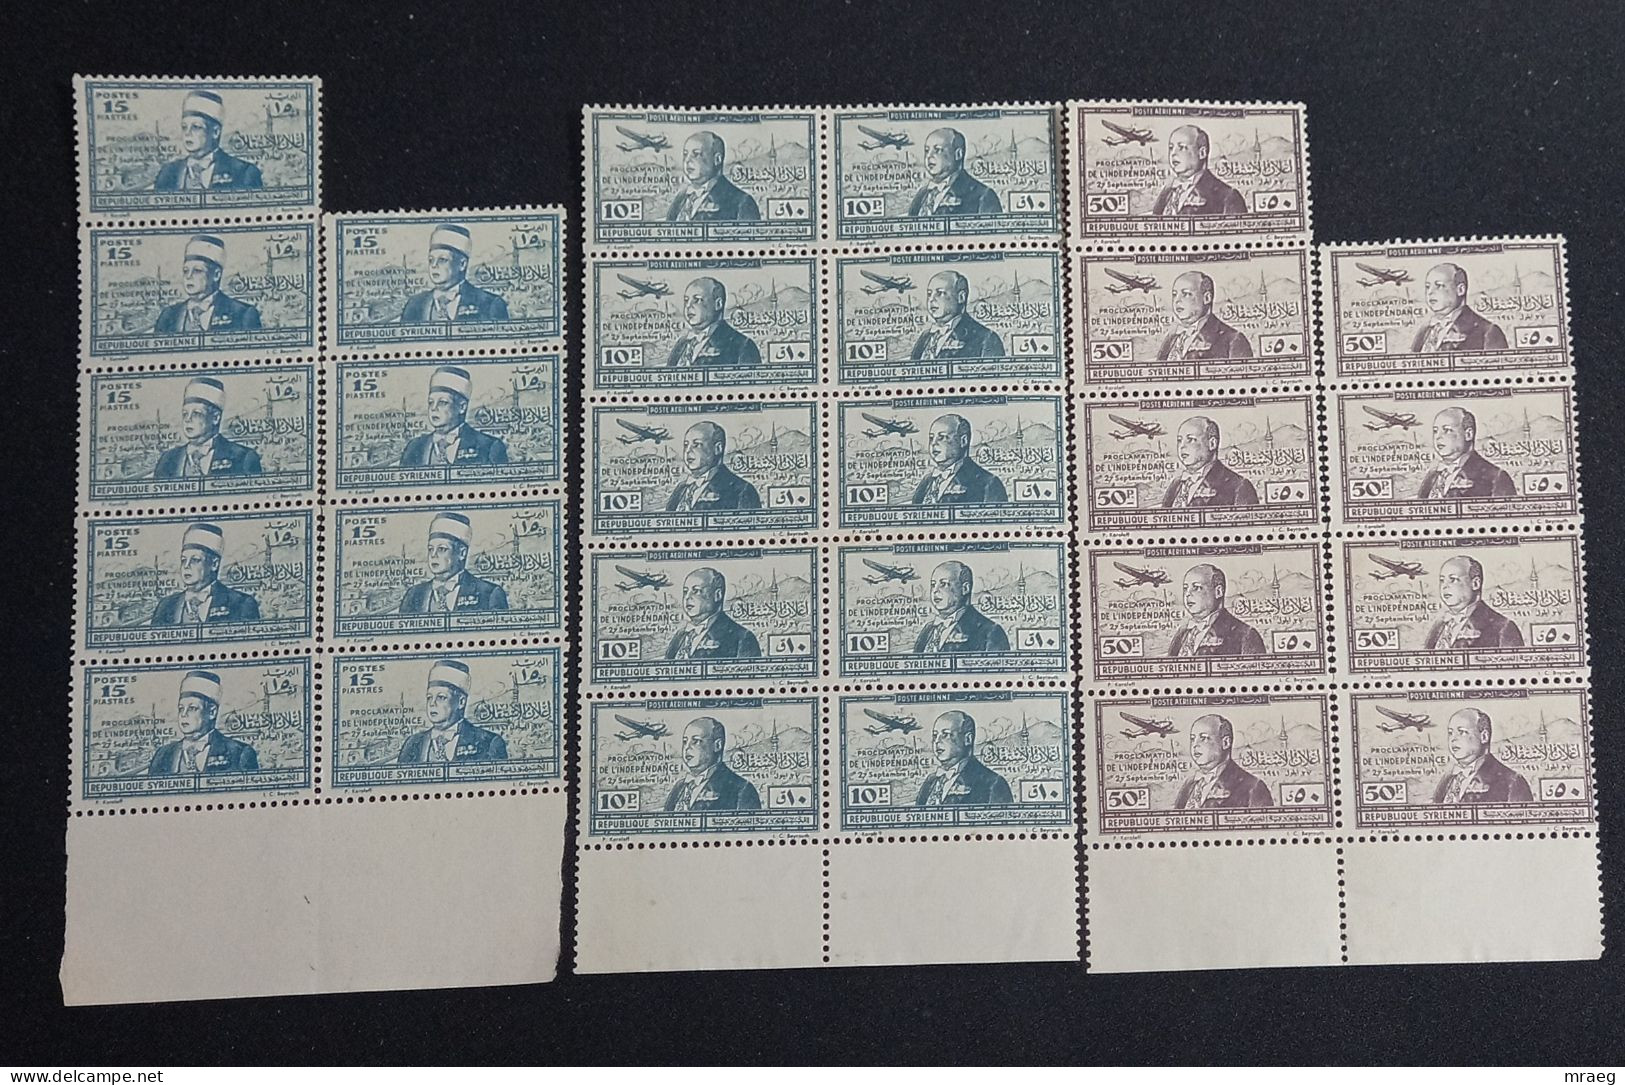 SYRIA 1942 Proclamation Of Independence - President Taj Addin El-Husni BLOCK STAMPS TOTALY 54 UNUSED NG - Syrie